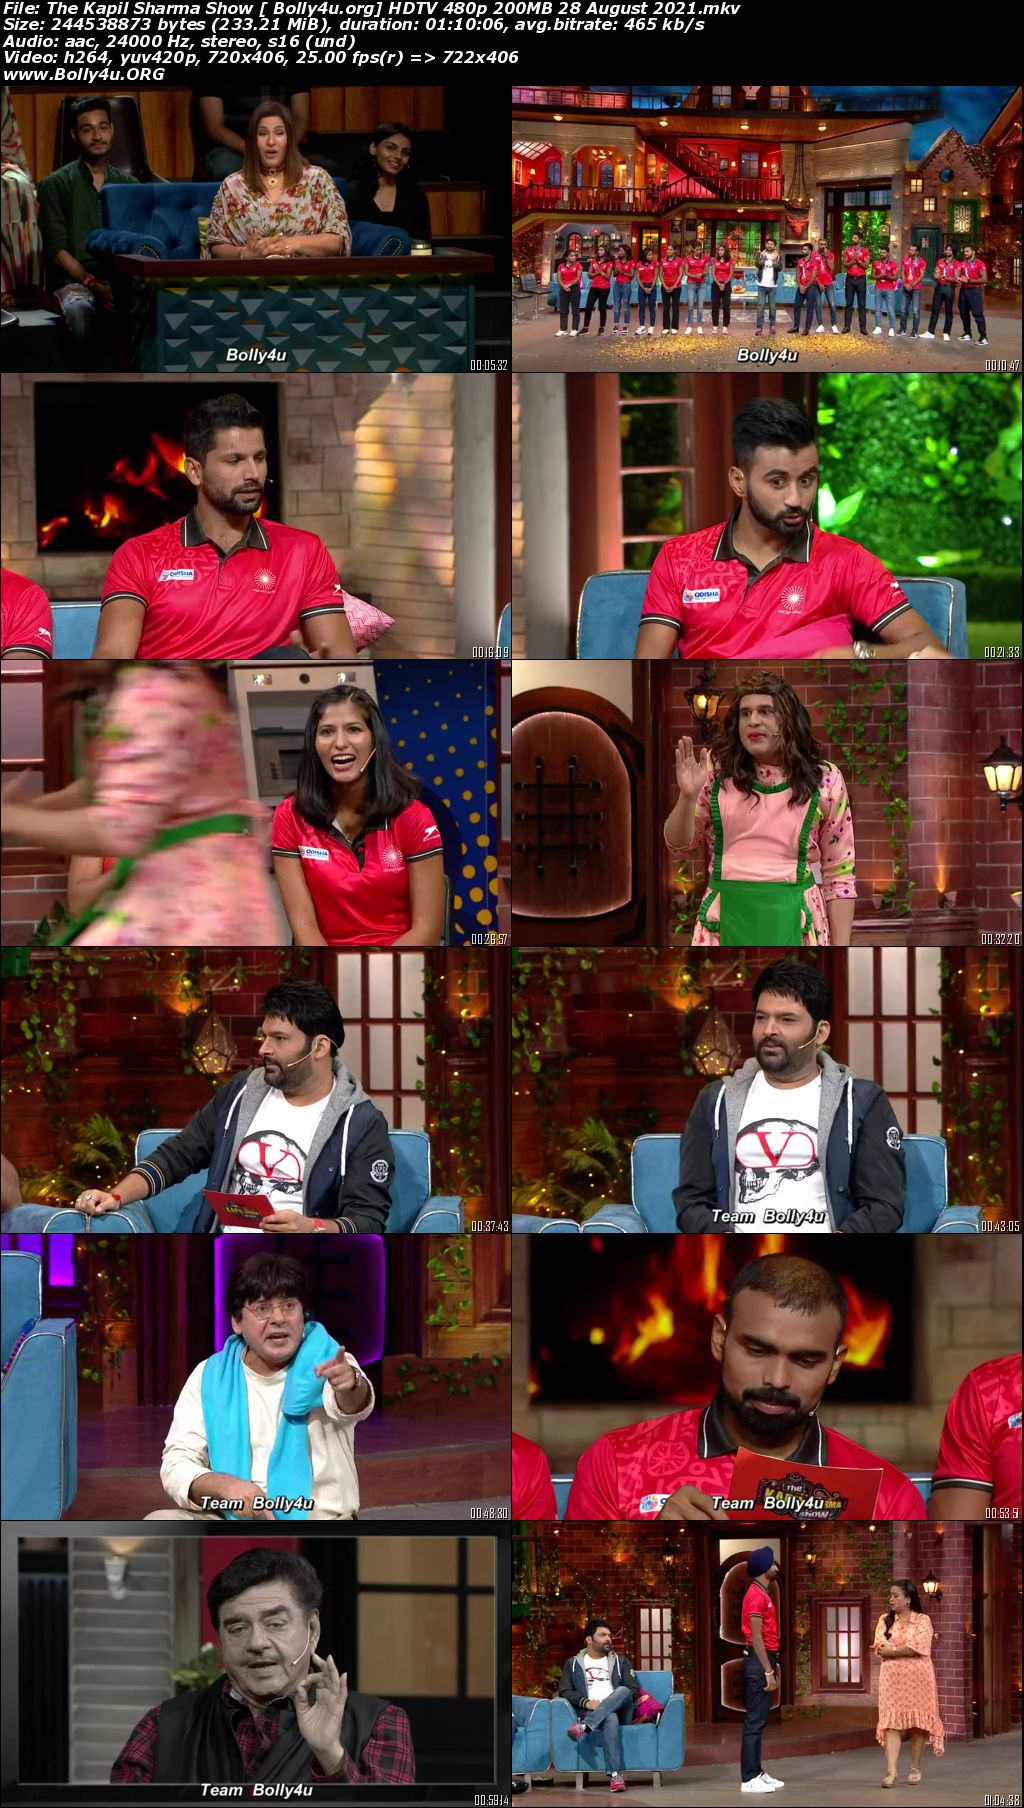 The Kapil Sharma Show HDTV 480p 200MB 28 August 2021 Download